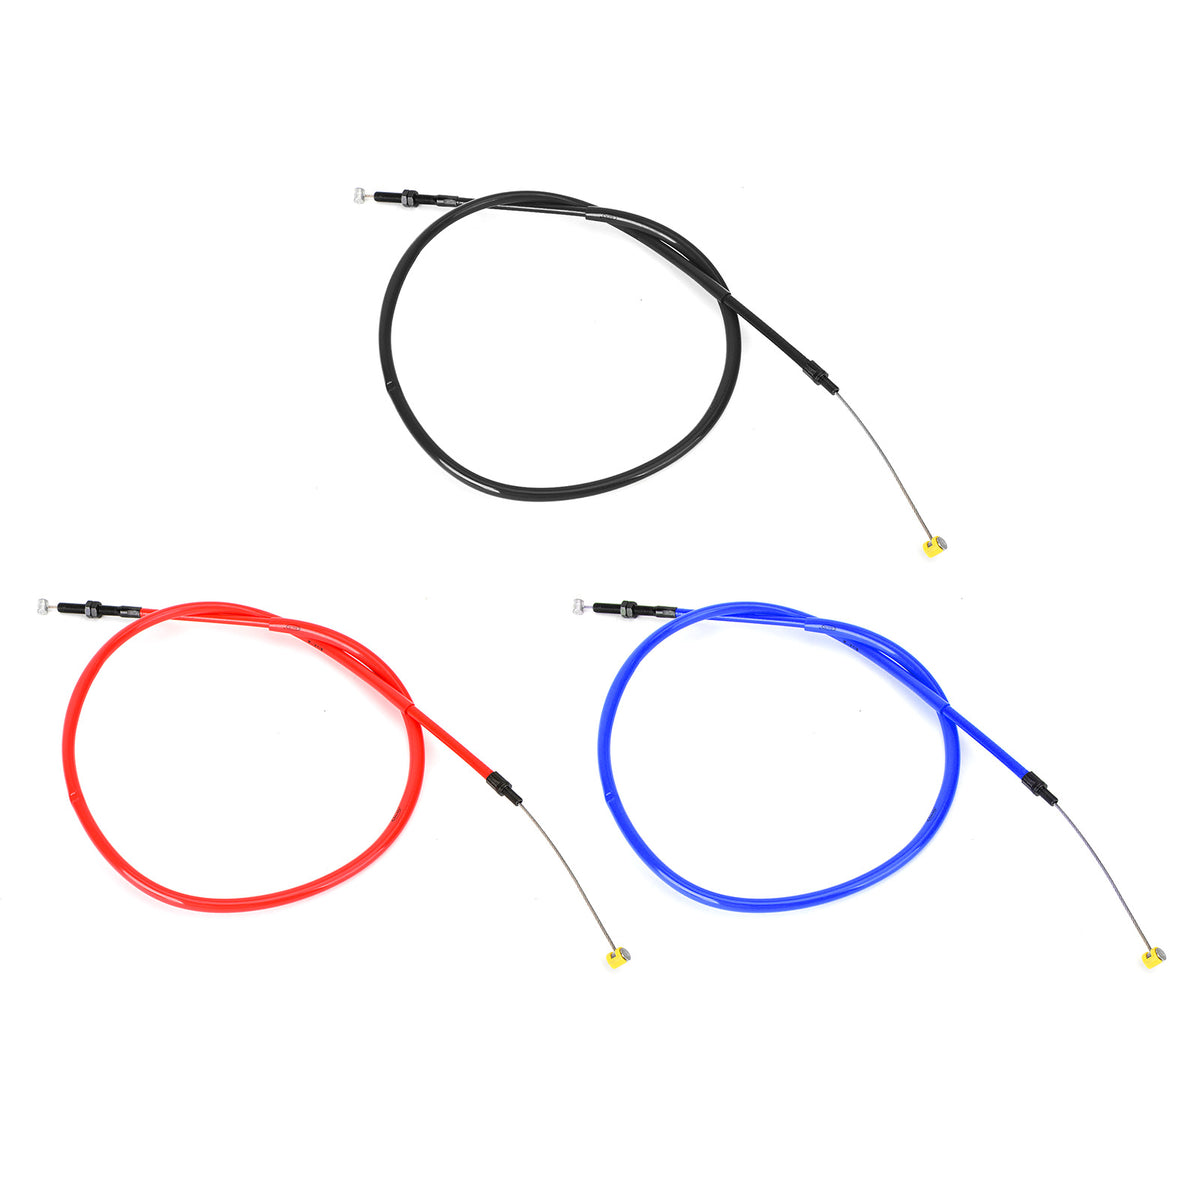 15-20 BMW S1000R S1000 R Motorcycle Clutch Cable Replacement